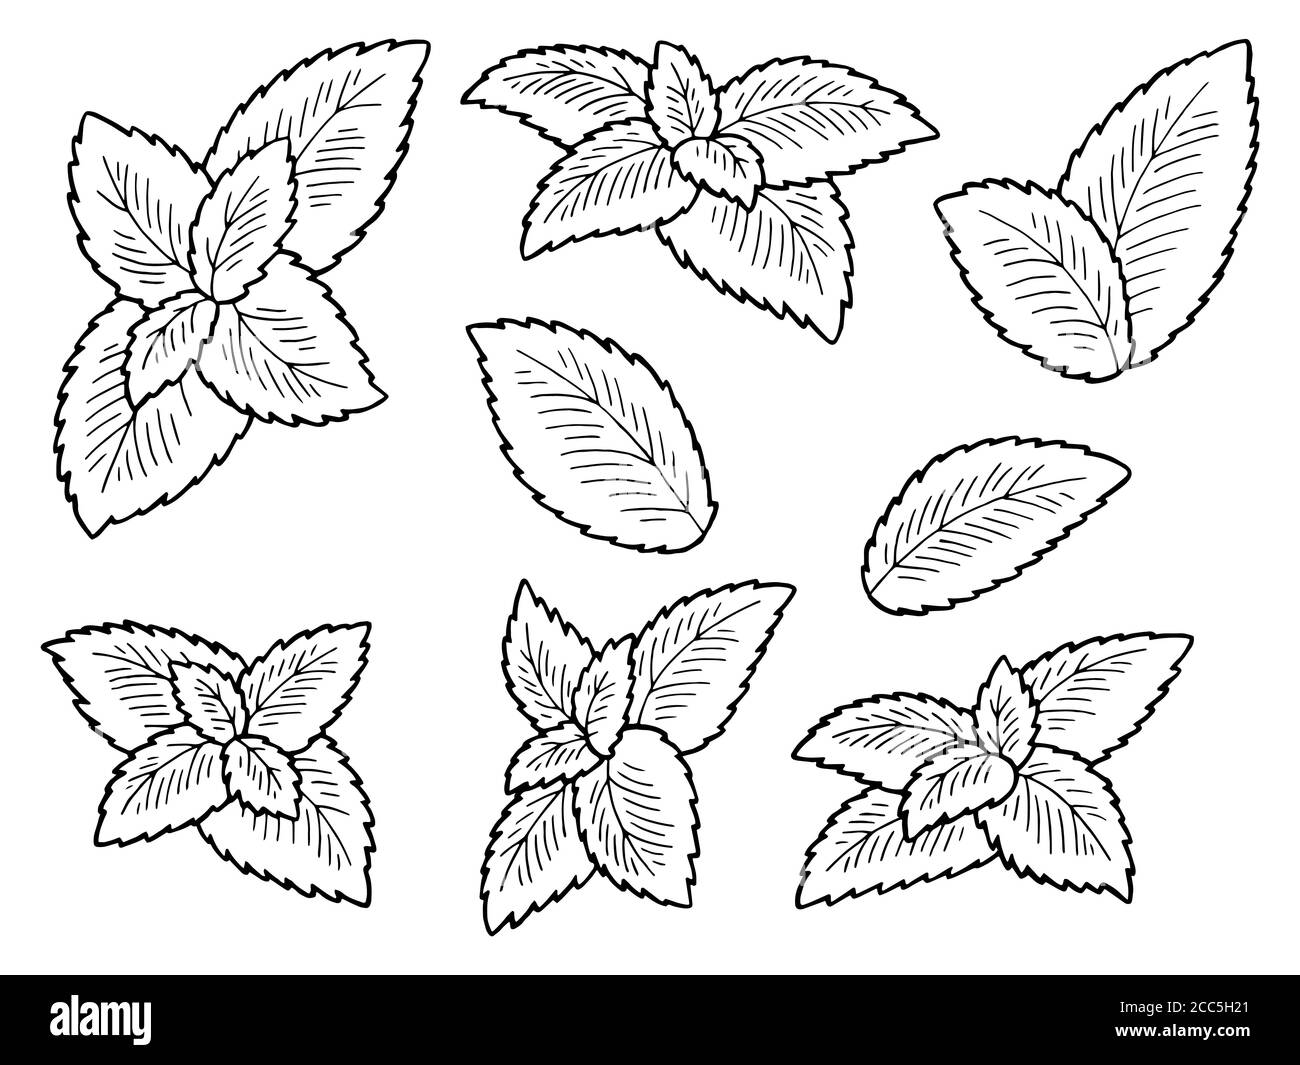 Mint plant graphic black white isolated sketch illustration vector Stock Vector